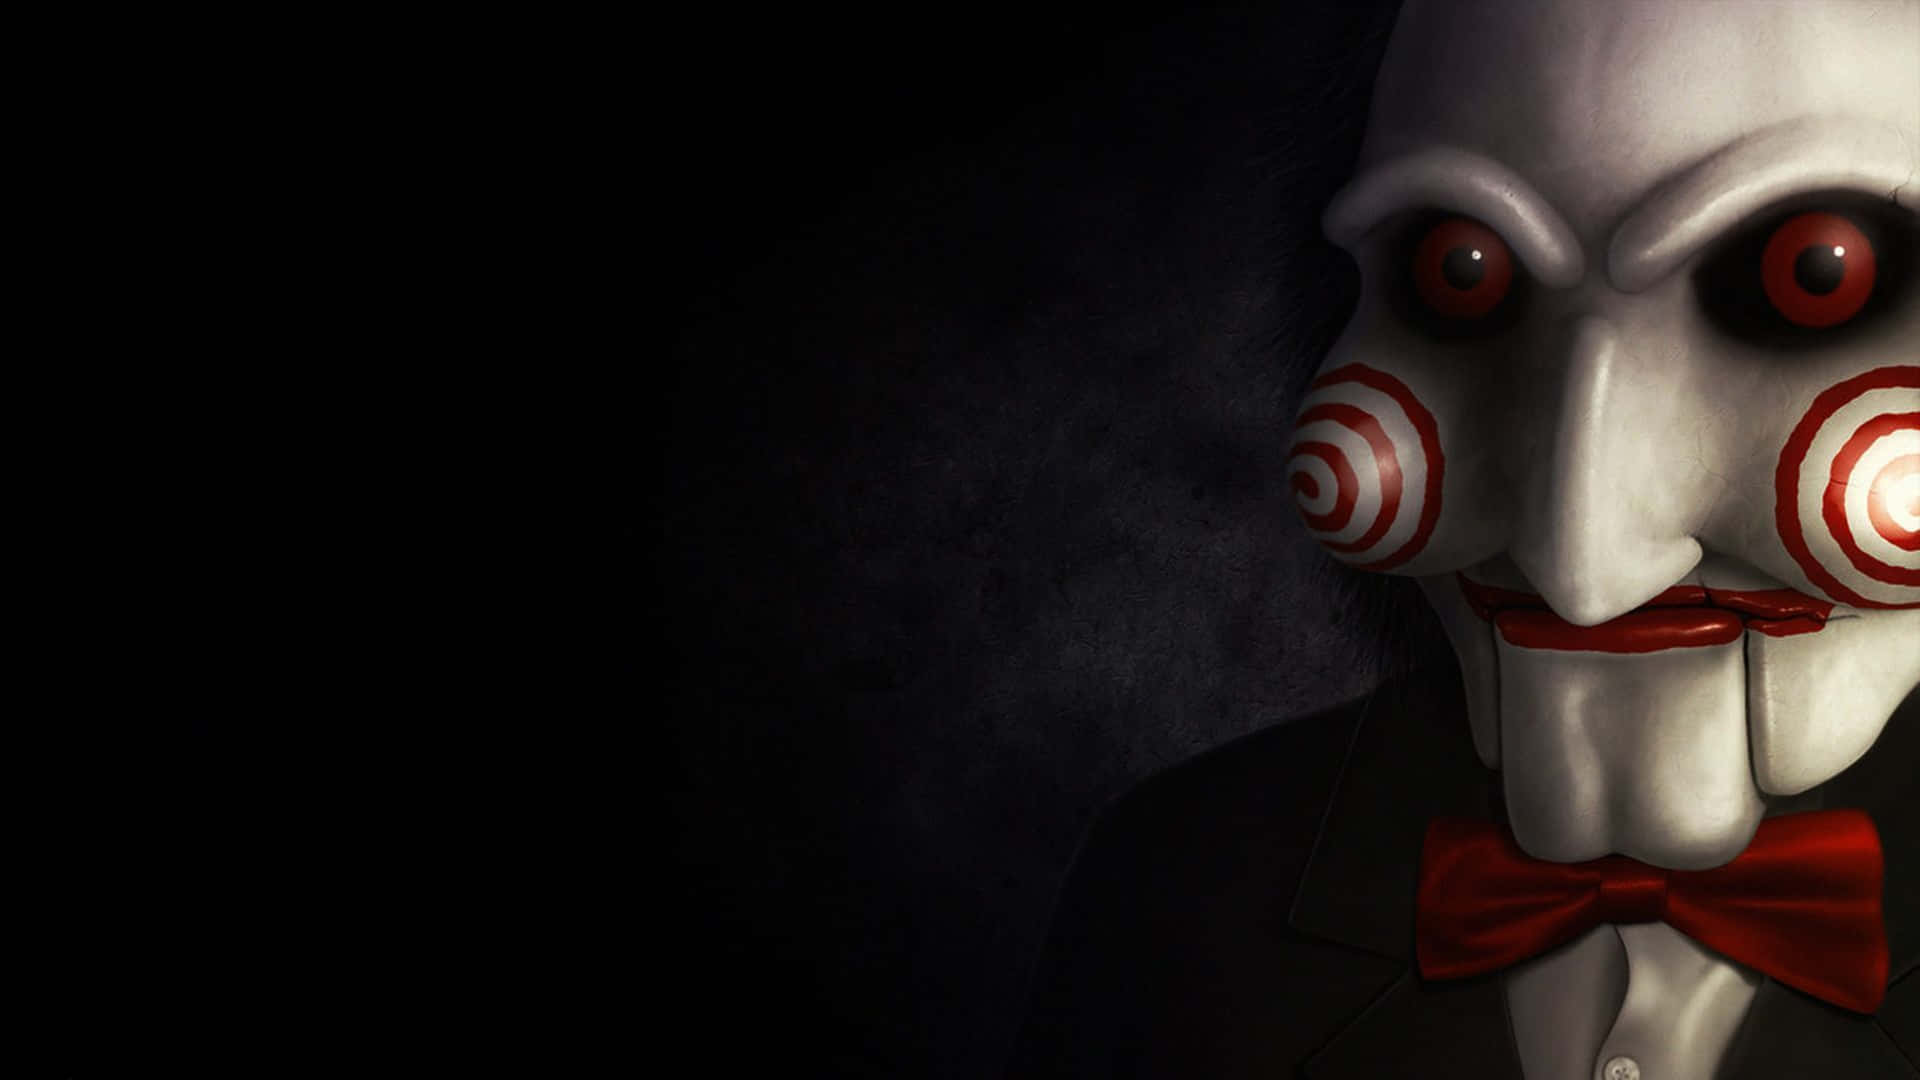 A Creepy Clown With A Bow Tie And A Dark Background